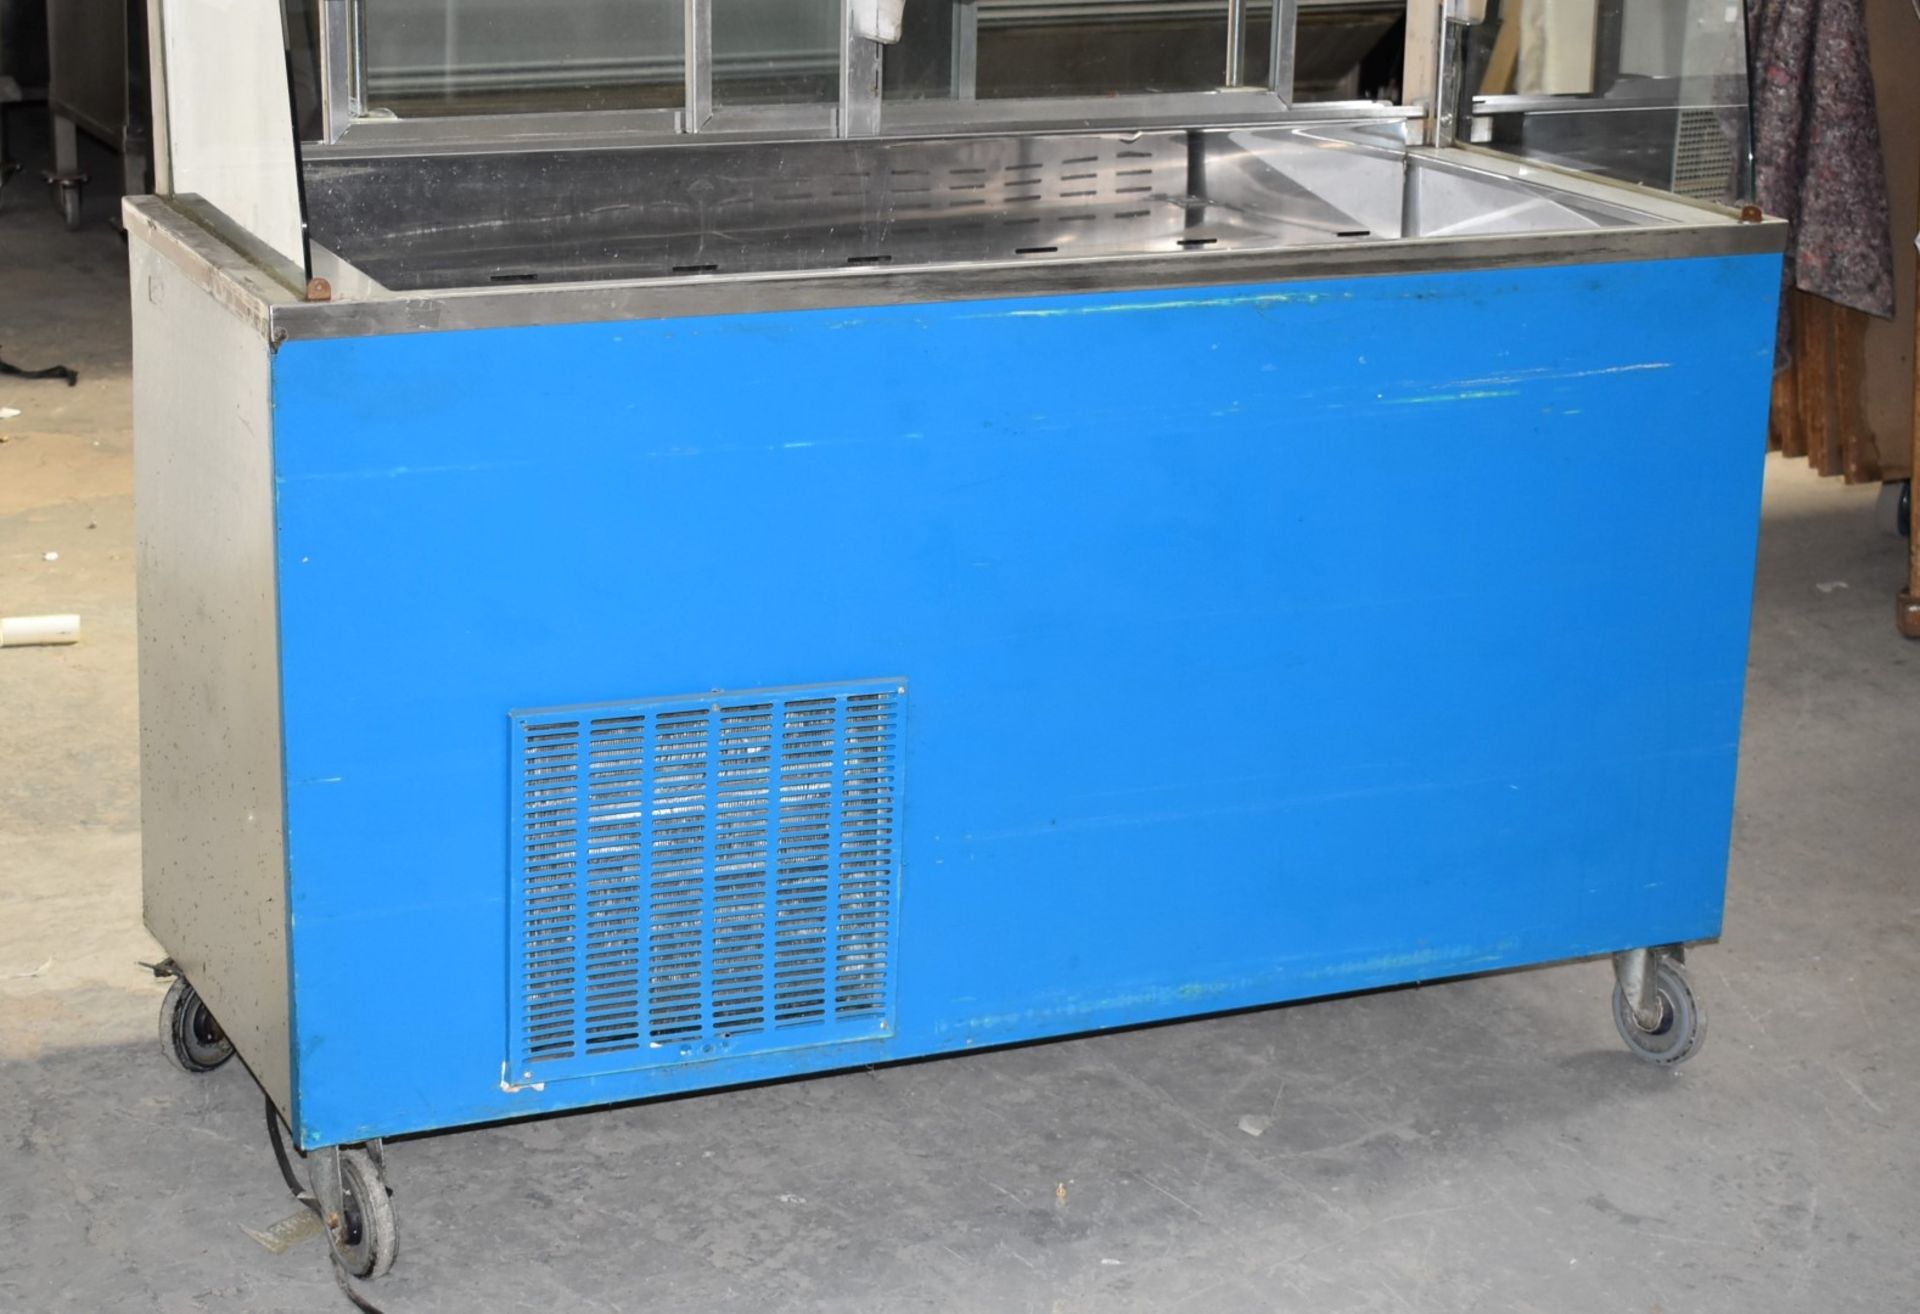 1 x Moffat Self Serve Refrigerated Food Chiller - 240v - Dimensions: H160 x W150 x D64 cms - Image 5 of 8